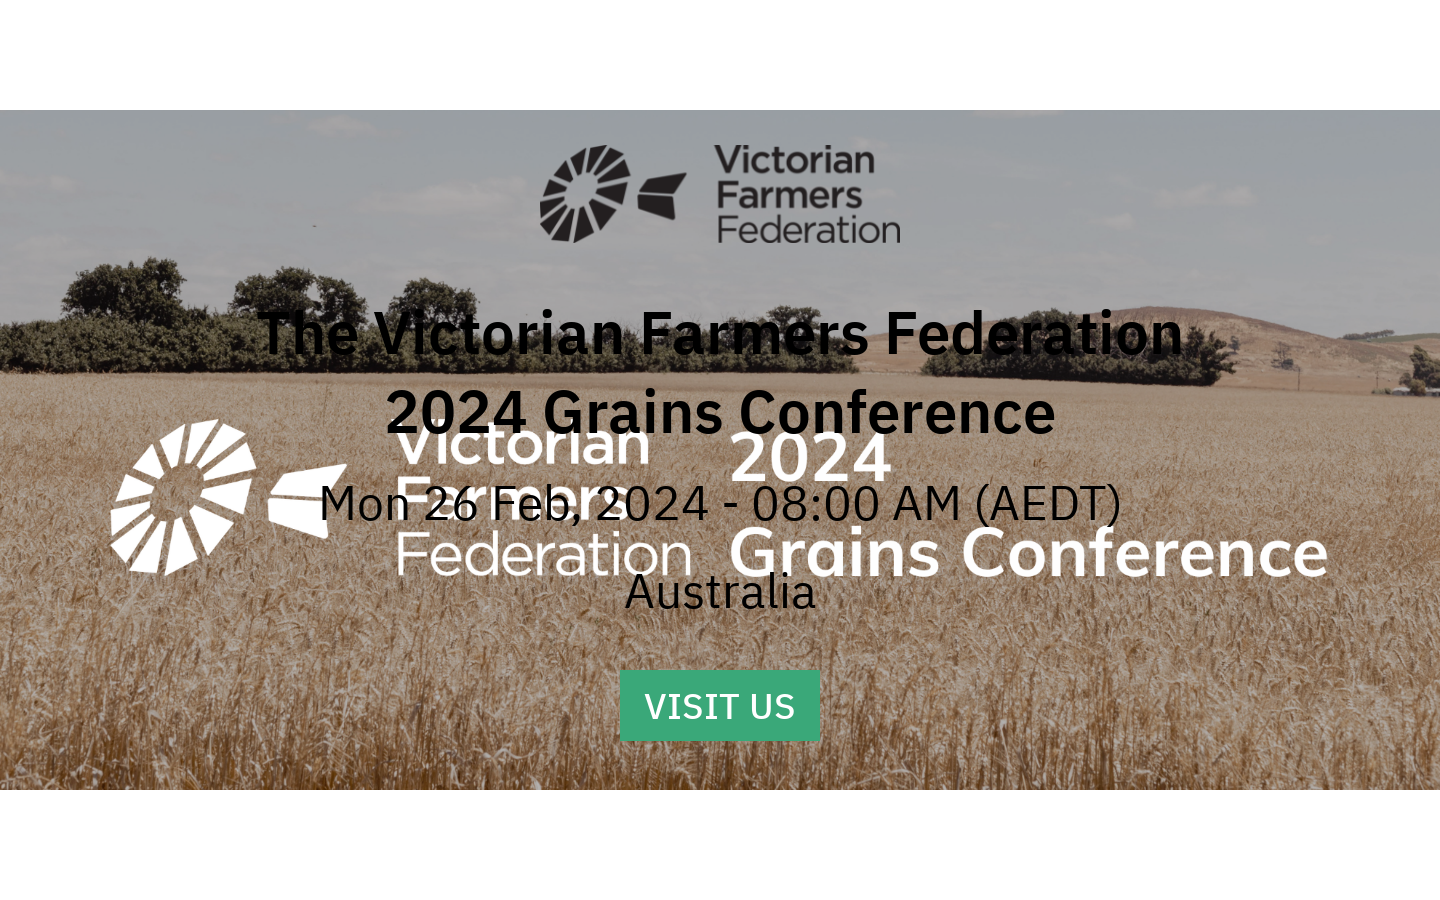 The Victorian Farmers Federation 2024 Grains Conference